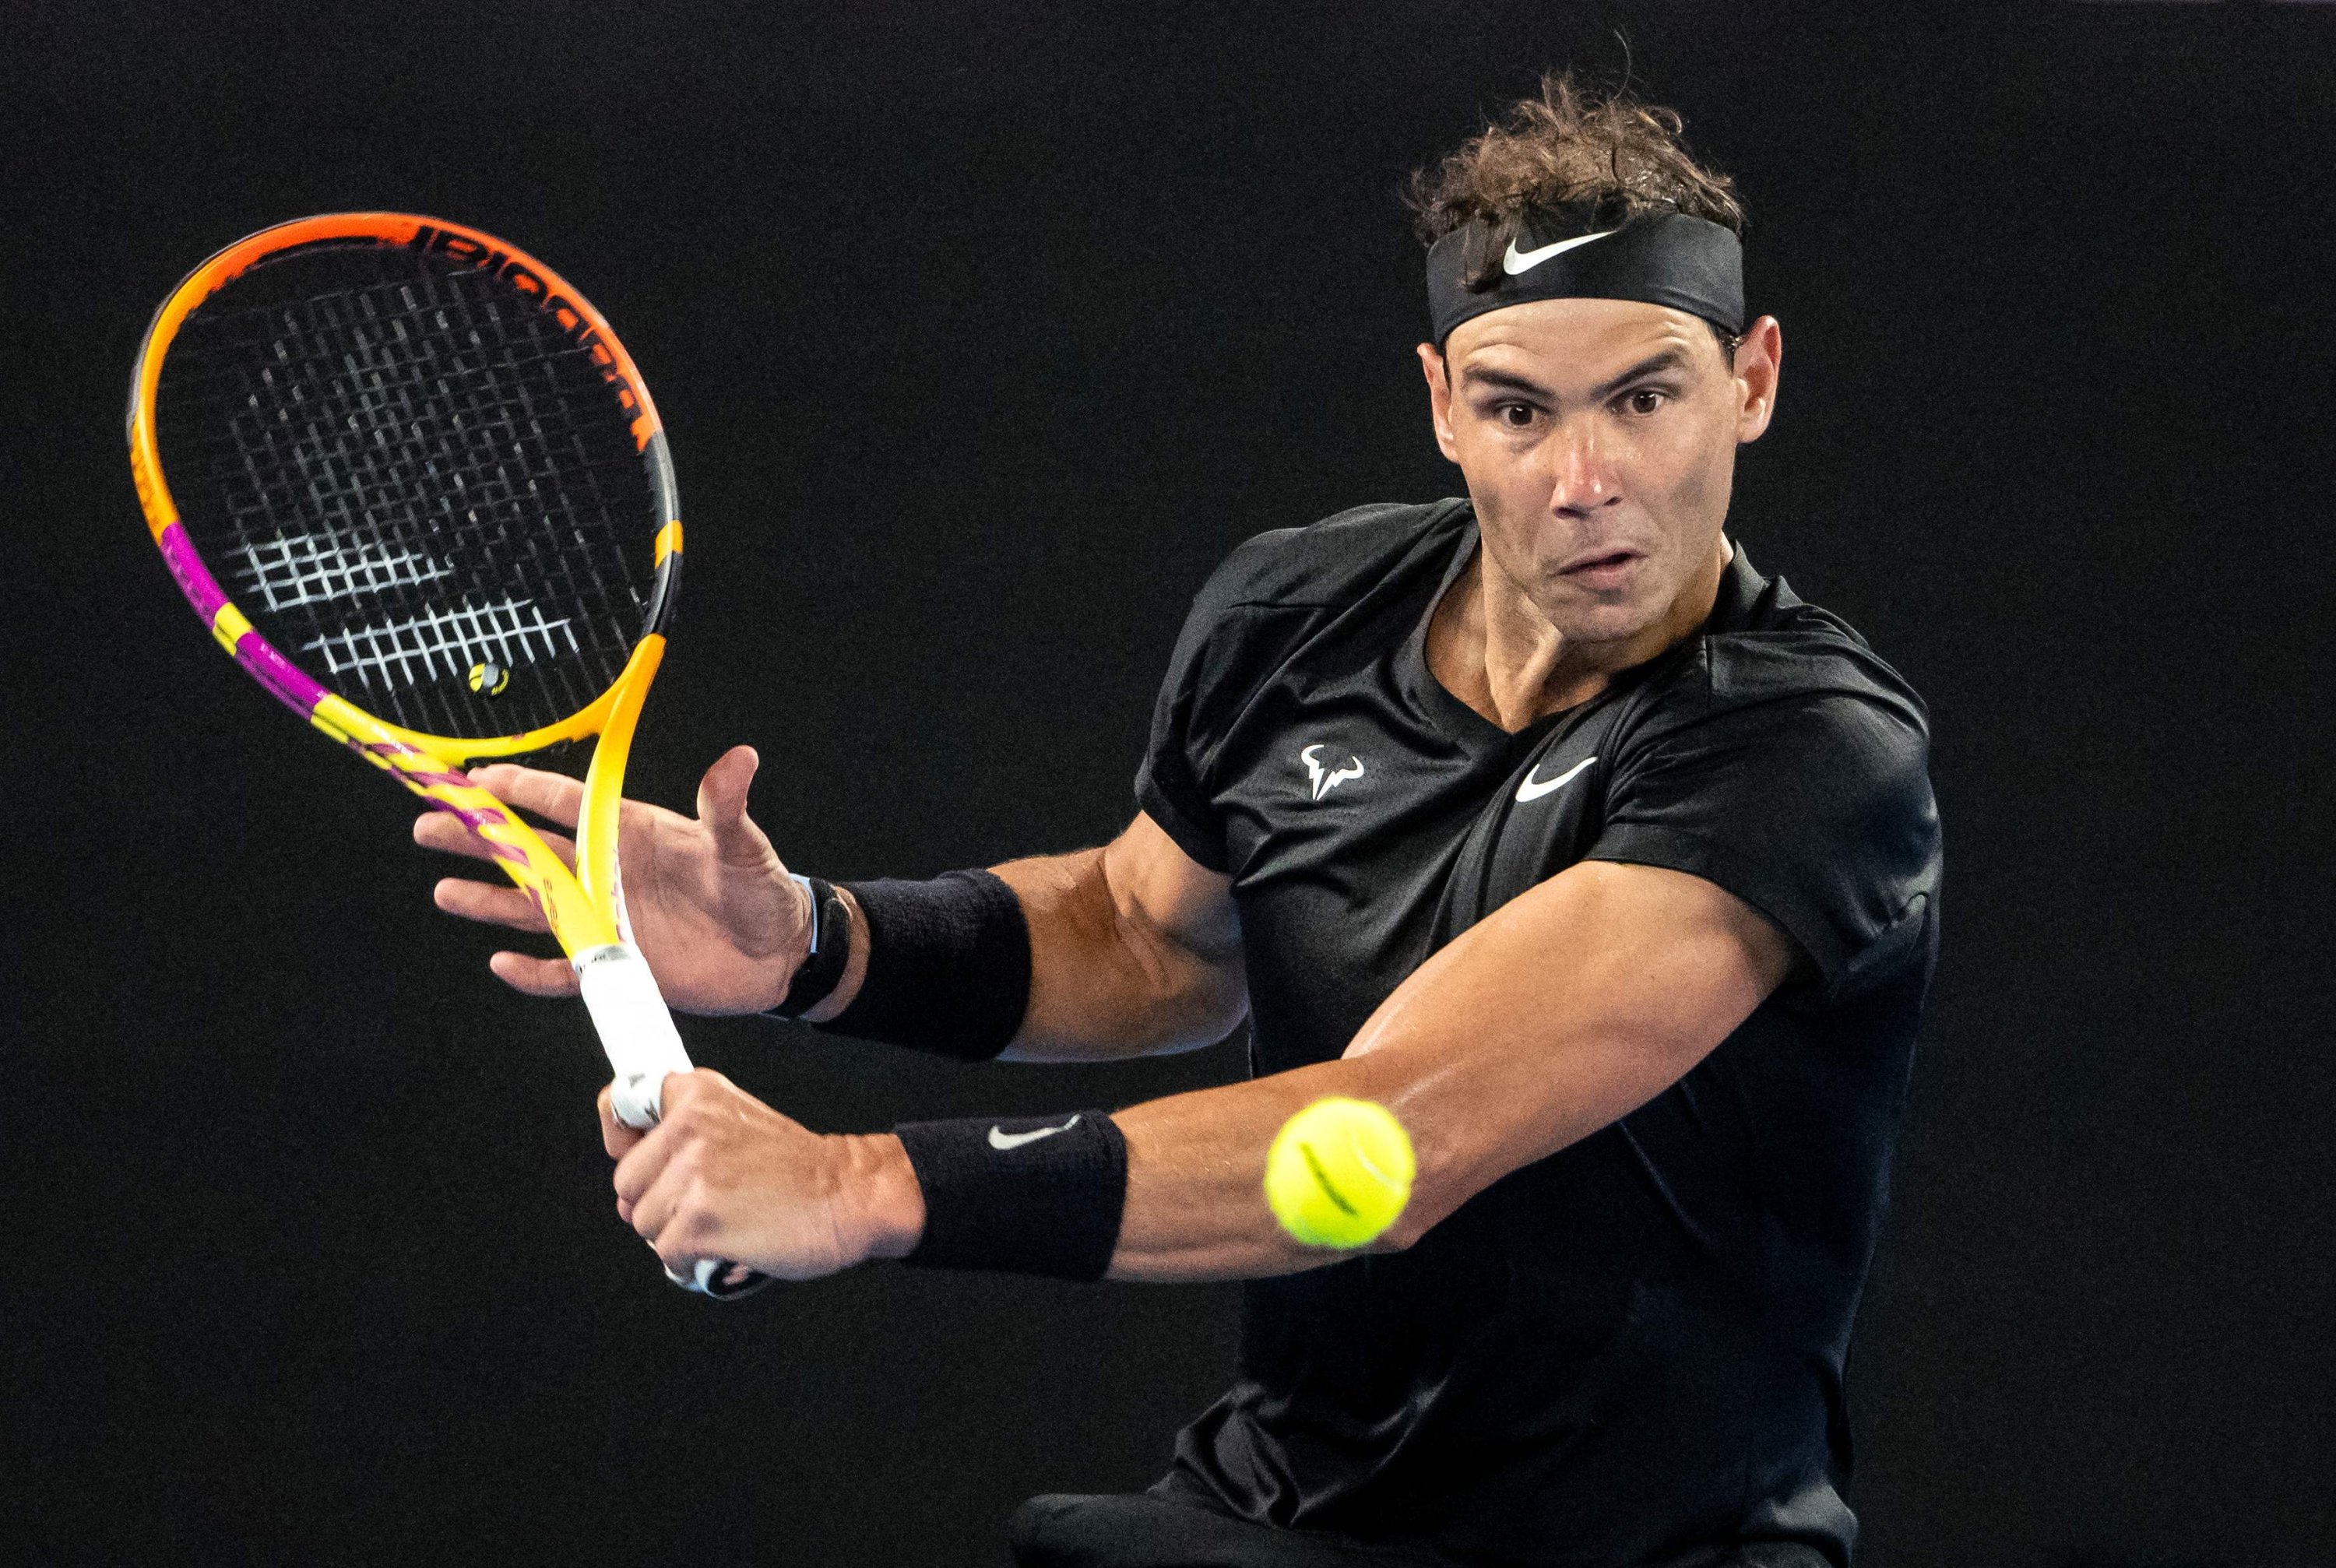 Nadal back with patchy win, discusses Djokovic, COVID-19 recovery Daily Sabah